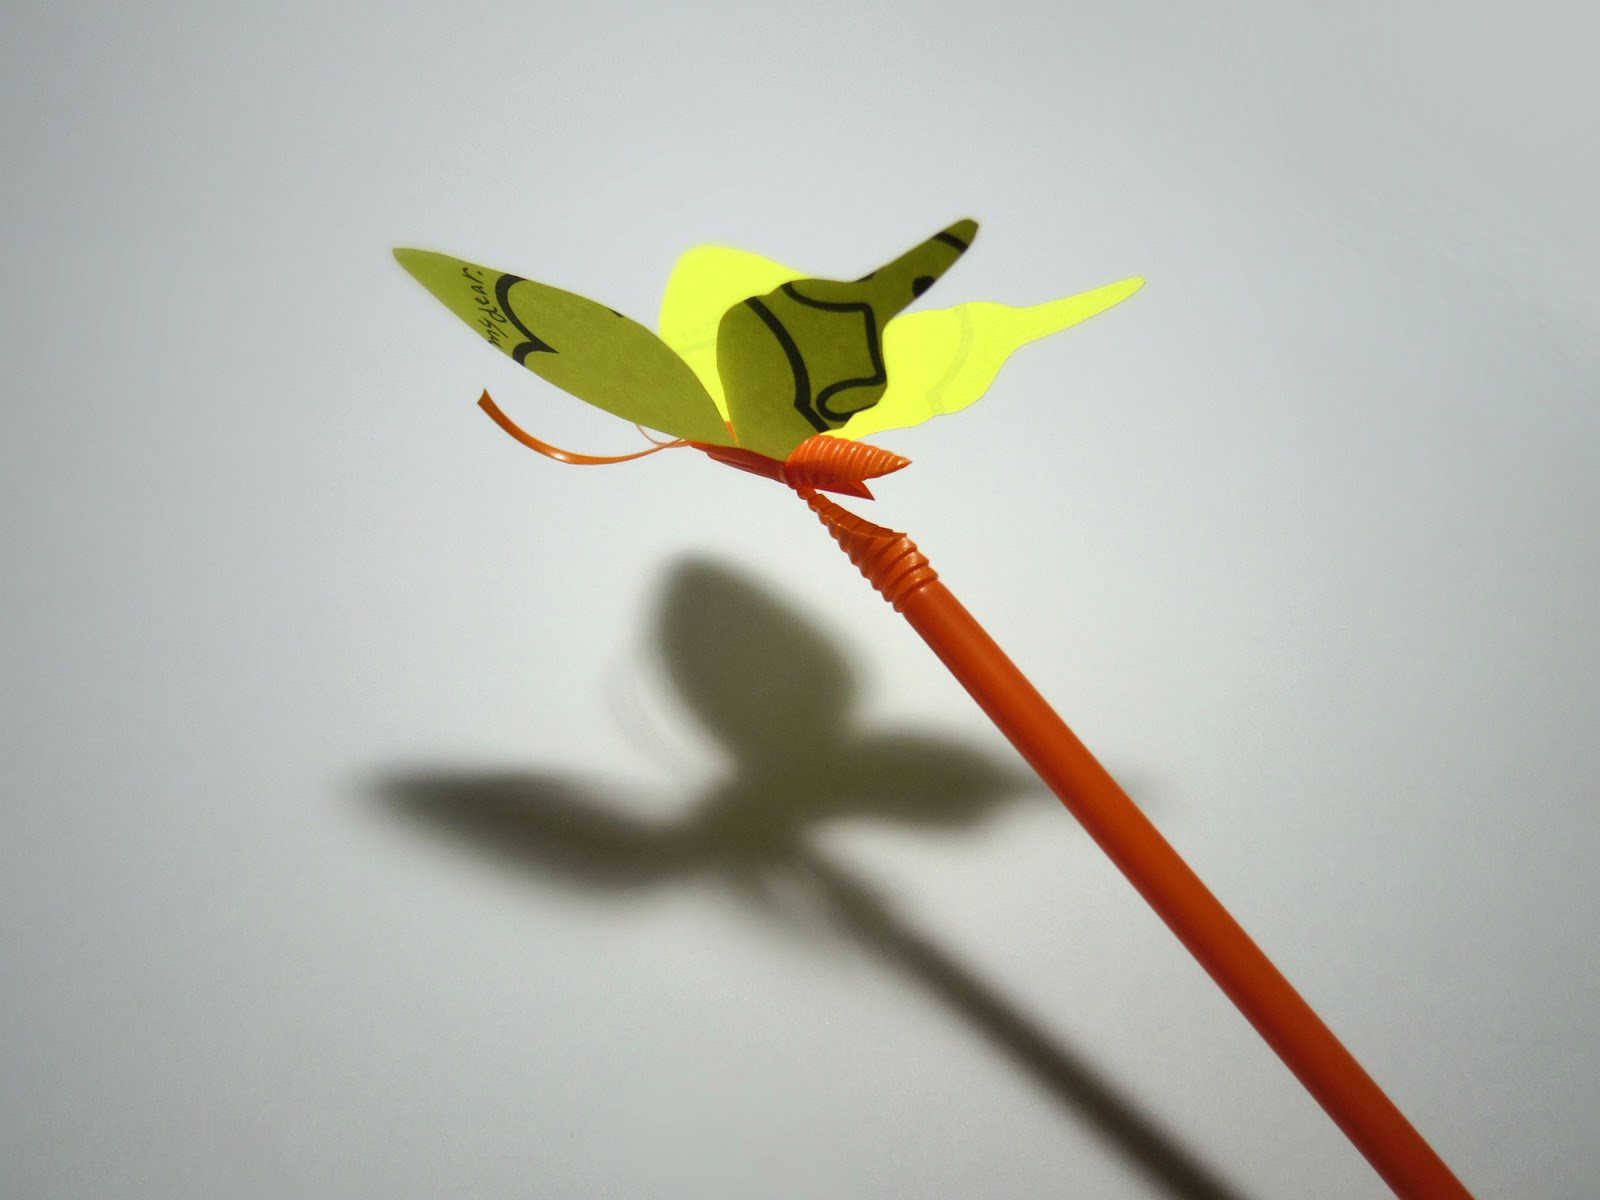 How To Make Butterfly From 1 Plastic Straw And Scratch Paper Br ストロー蝶の作り方